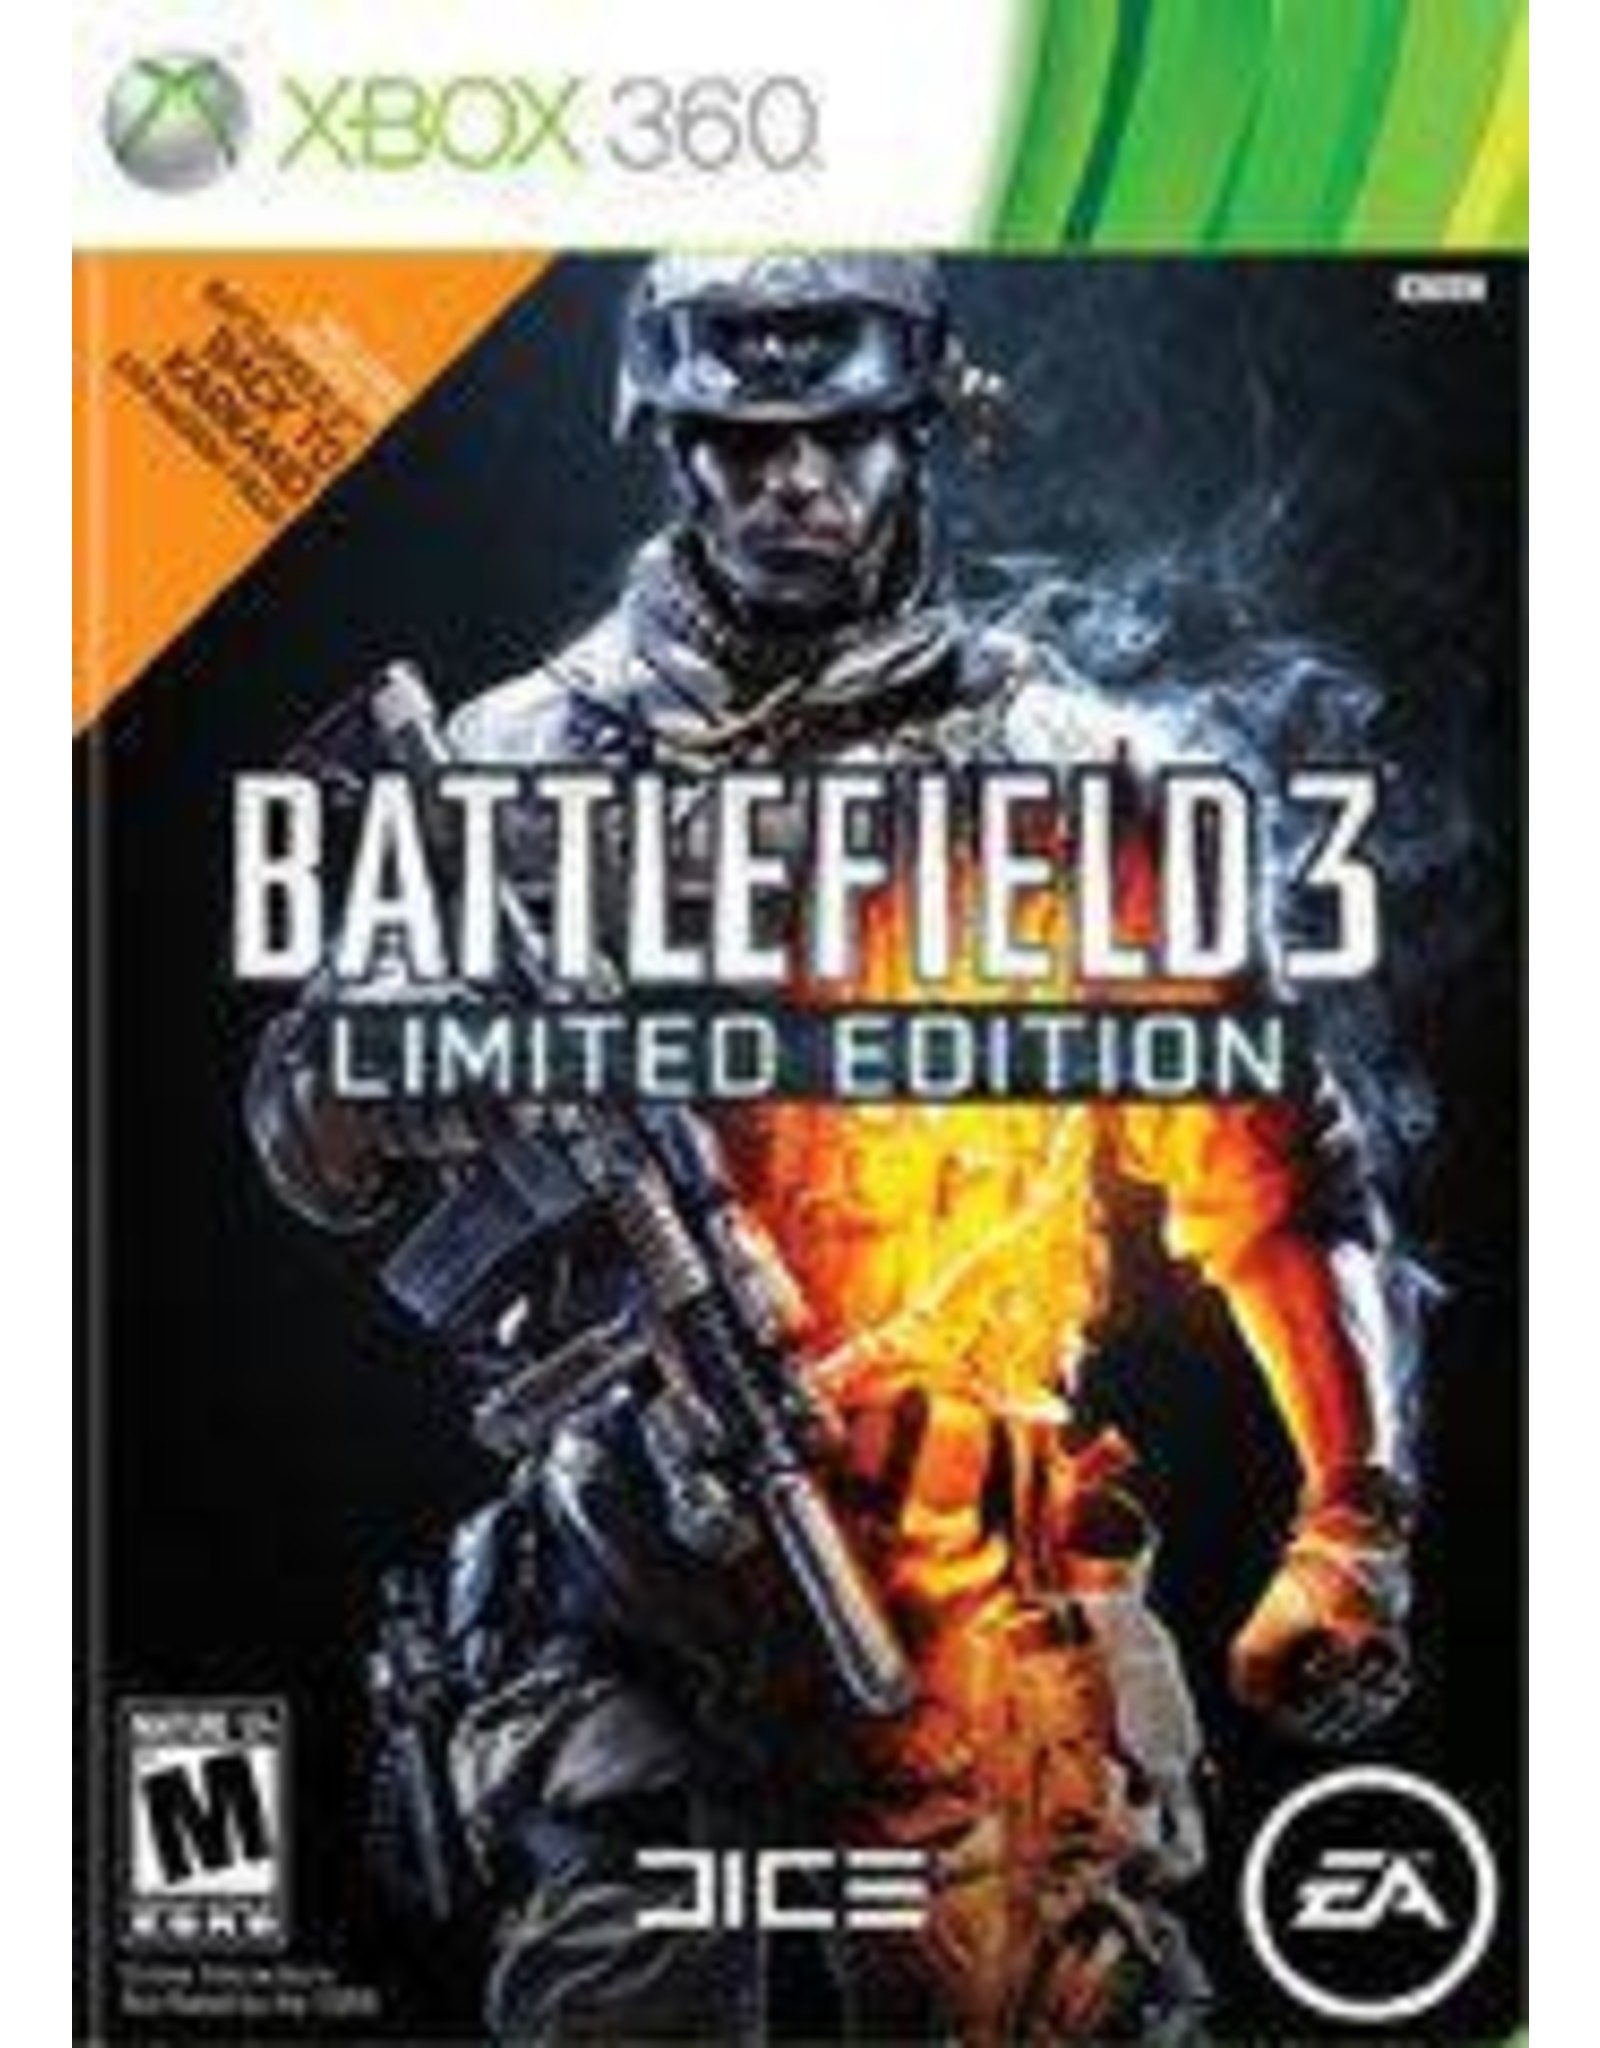 Xbox 360 Battlefield 3 Limited Edition - No DLC (Used)